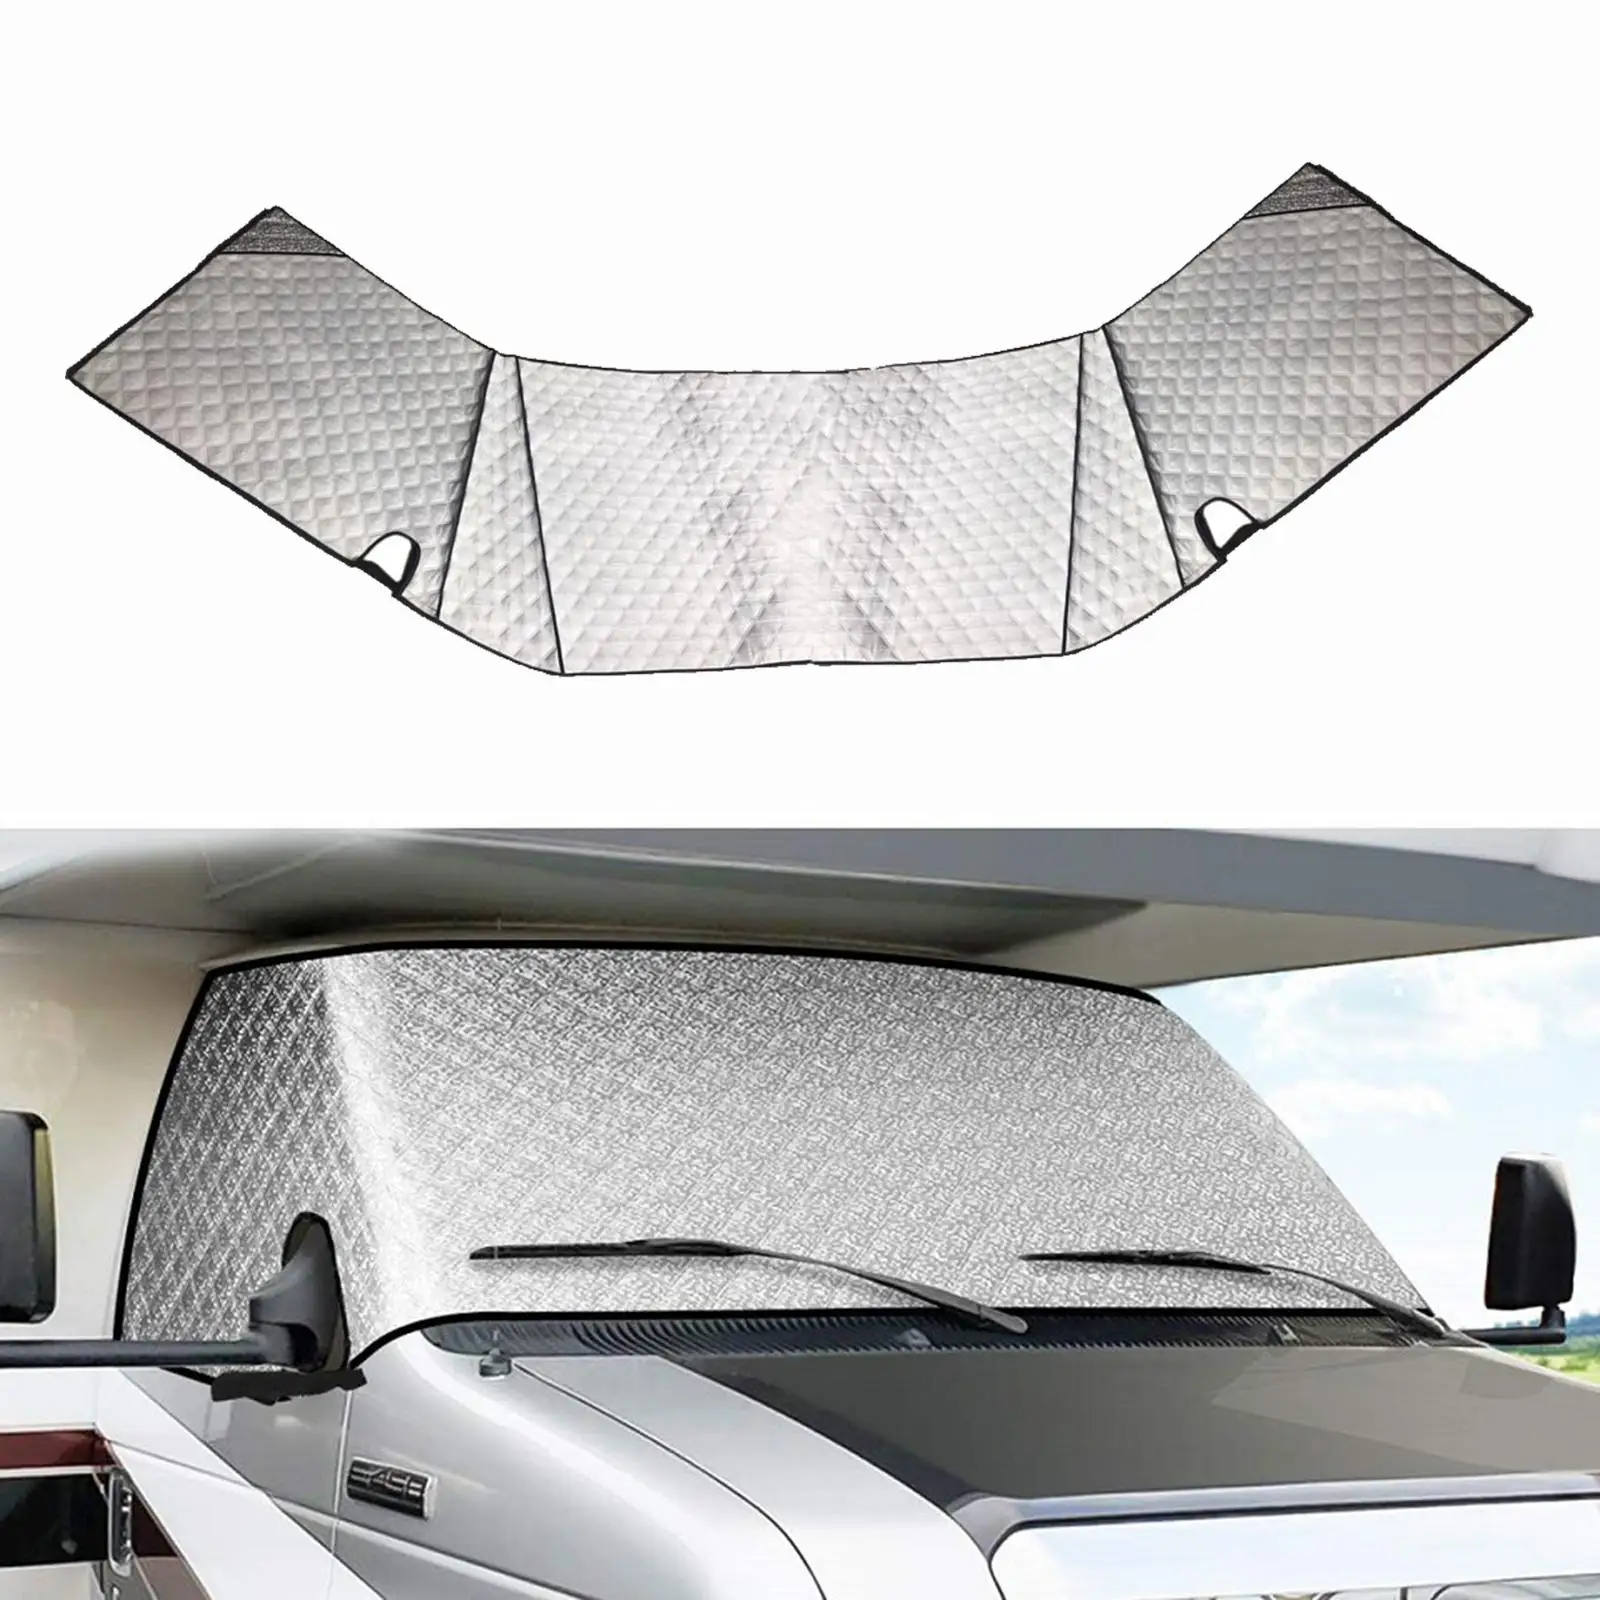 Windshield Sunshade Cover Durable  Protect Accs Visor for RV Motorhome